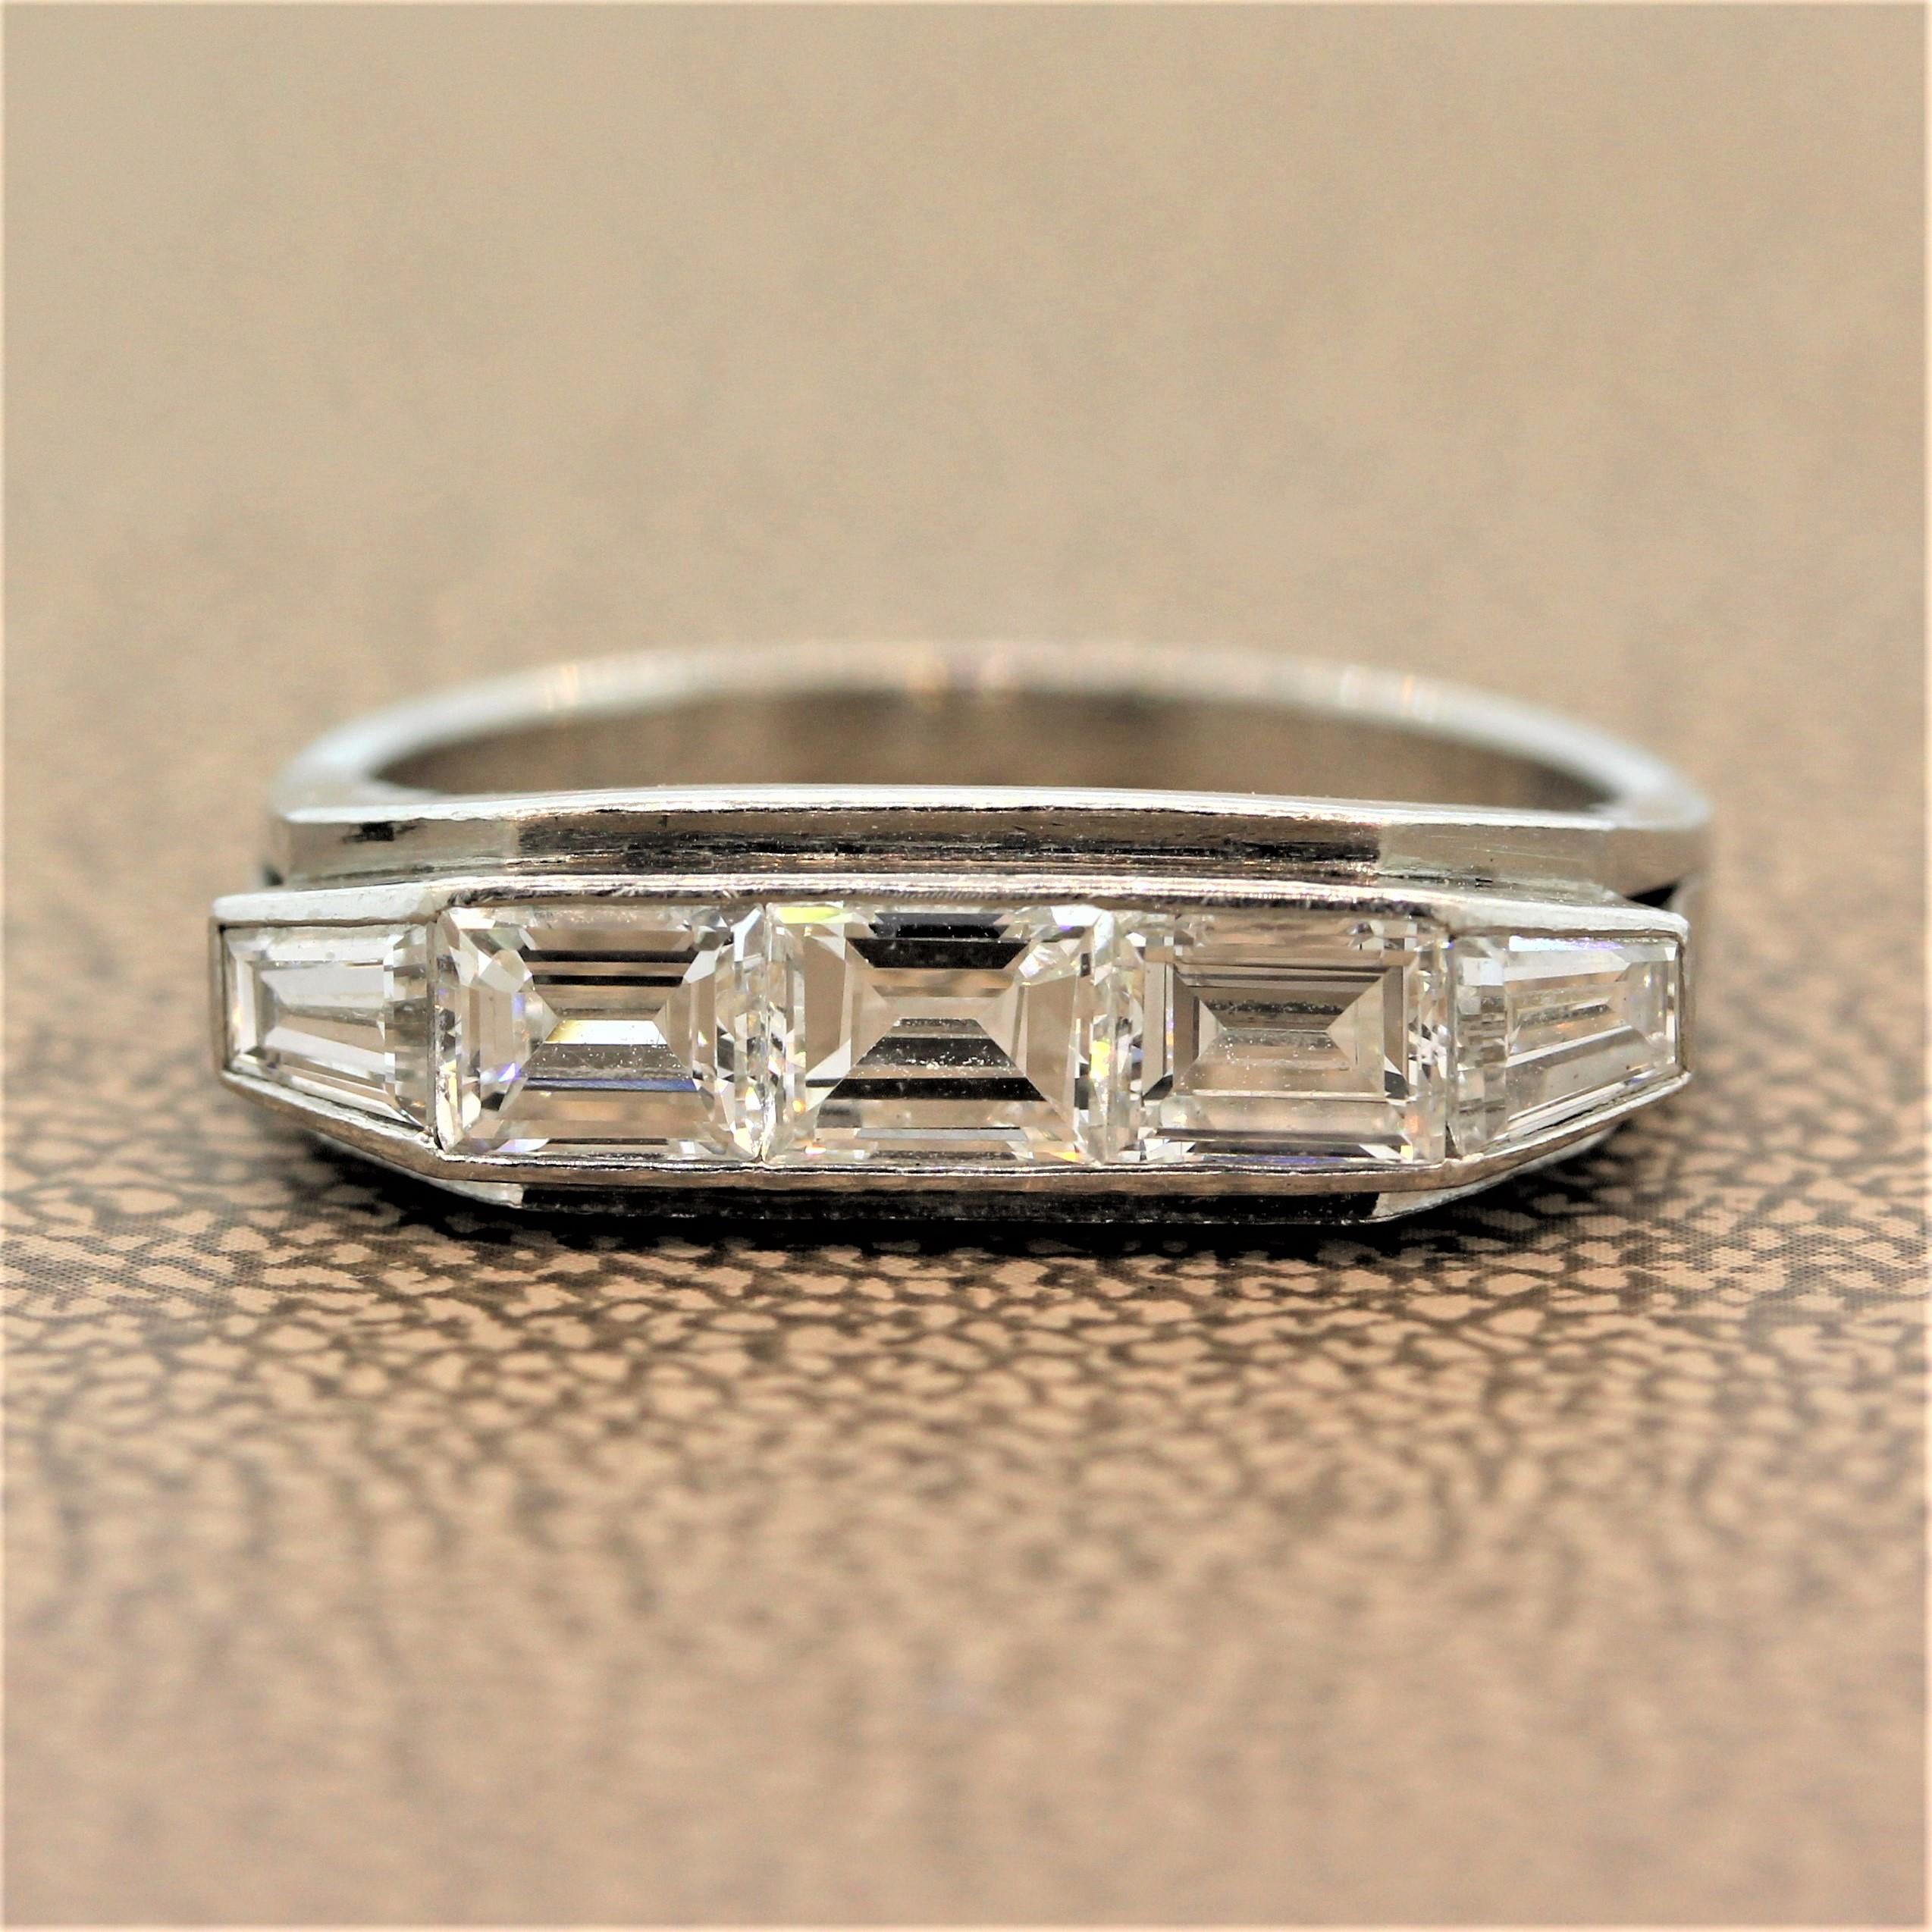 An unassuming mid-century treasure. This everyday ring features a flat top with 1.37 carats of baguette cut diamonds in a hand fabricated platinum setting with a tapered baguette cut diamond at each end.   

Ring Size 6.75 (Sizable)
